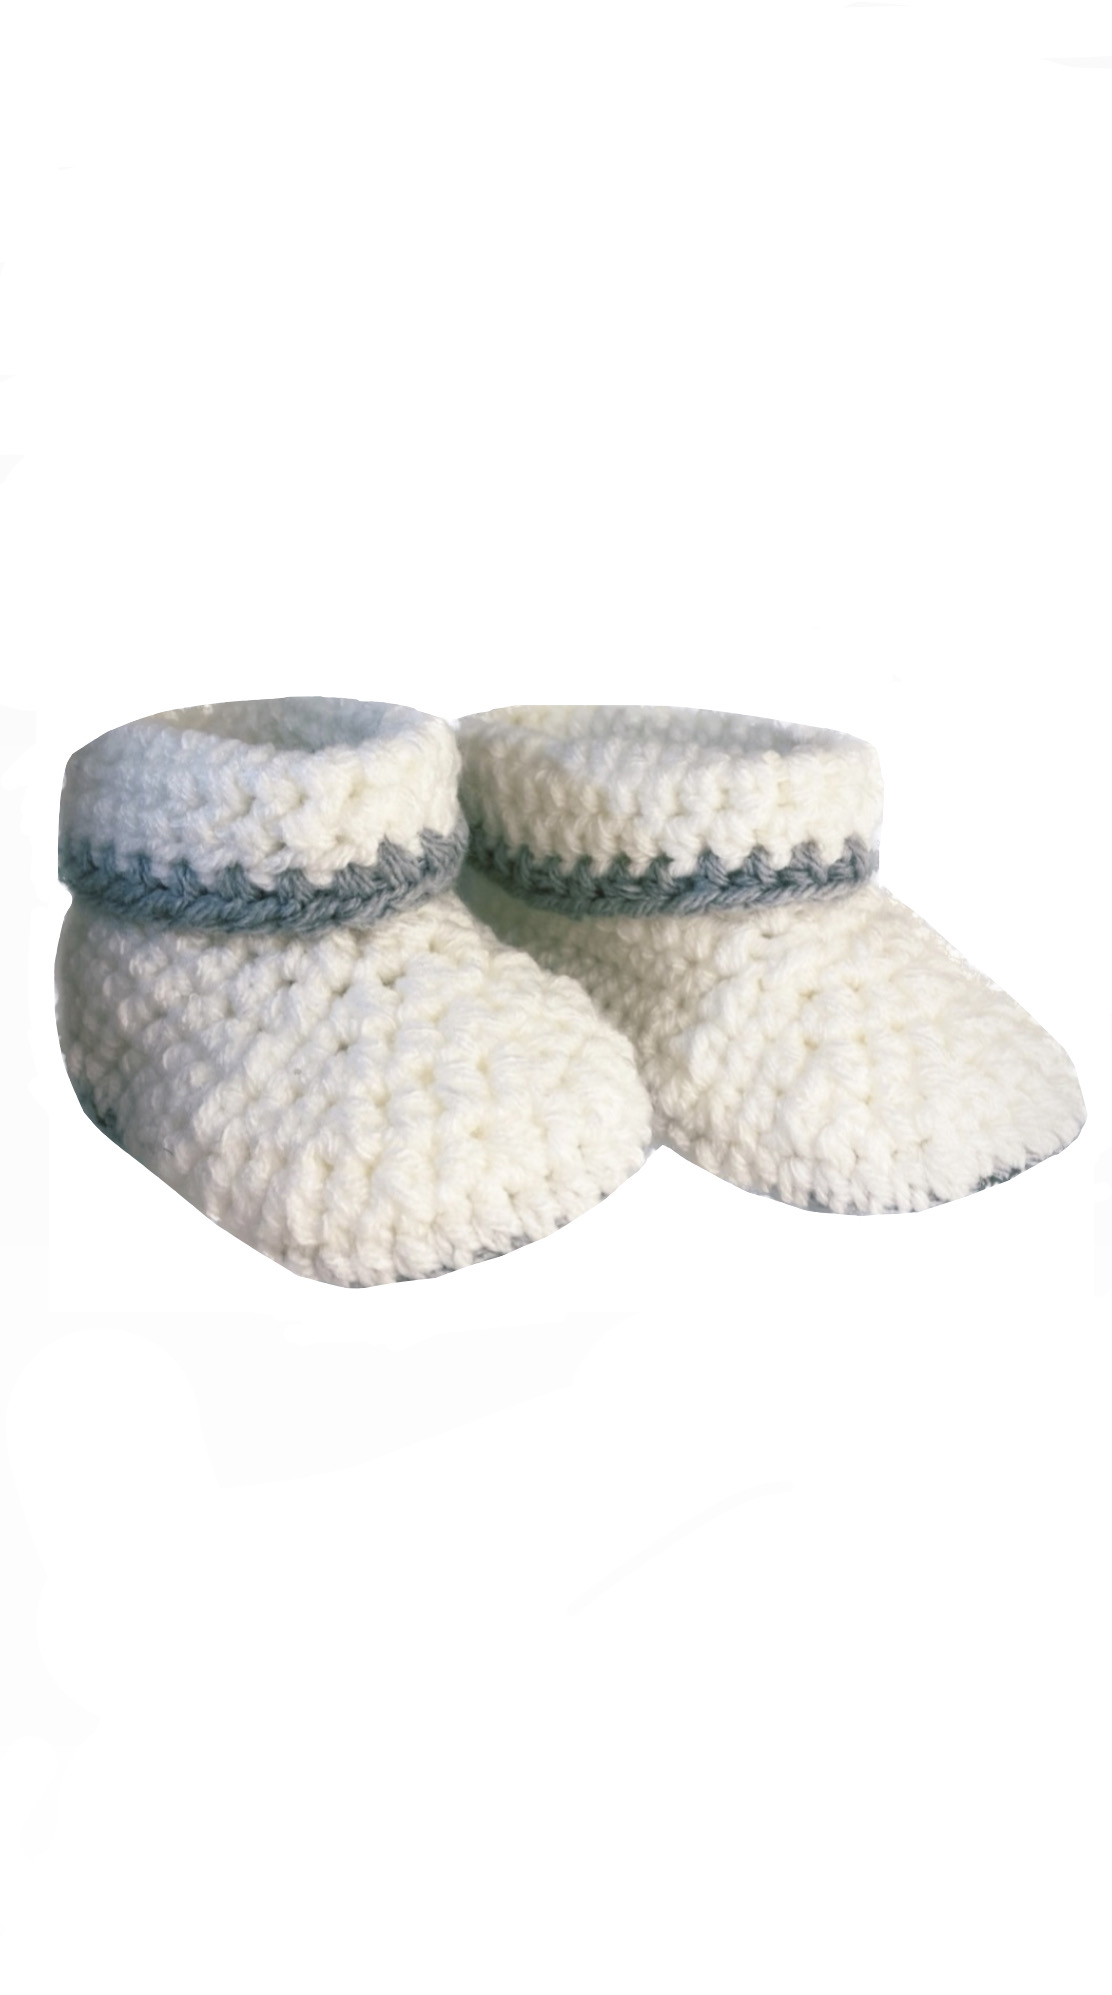 Pikkaboo Cuddles and Snuggles Crochet Baby Booties - White & Grey